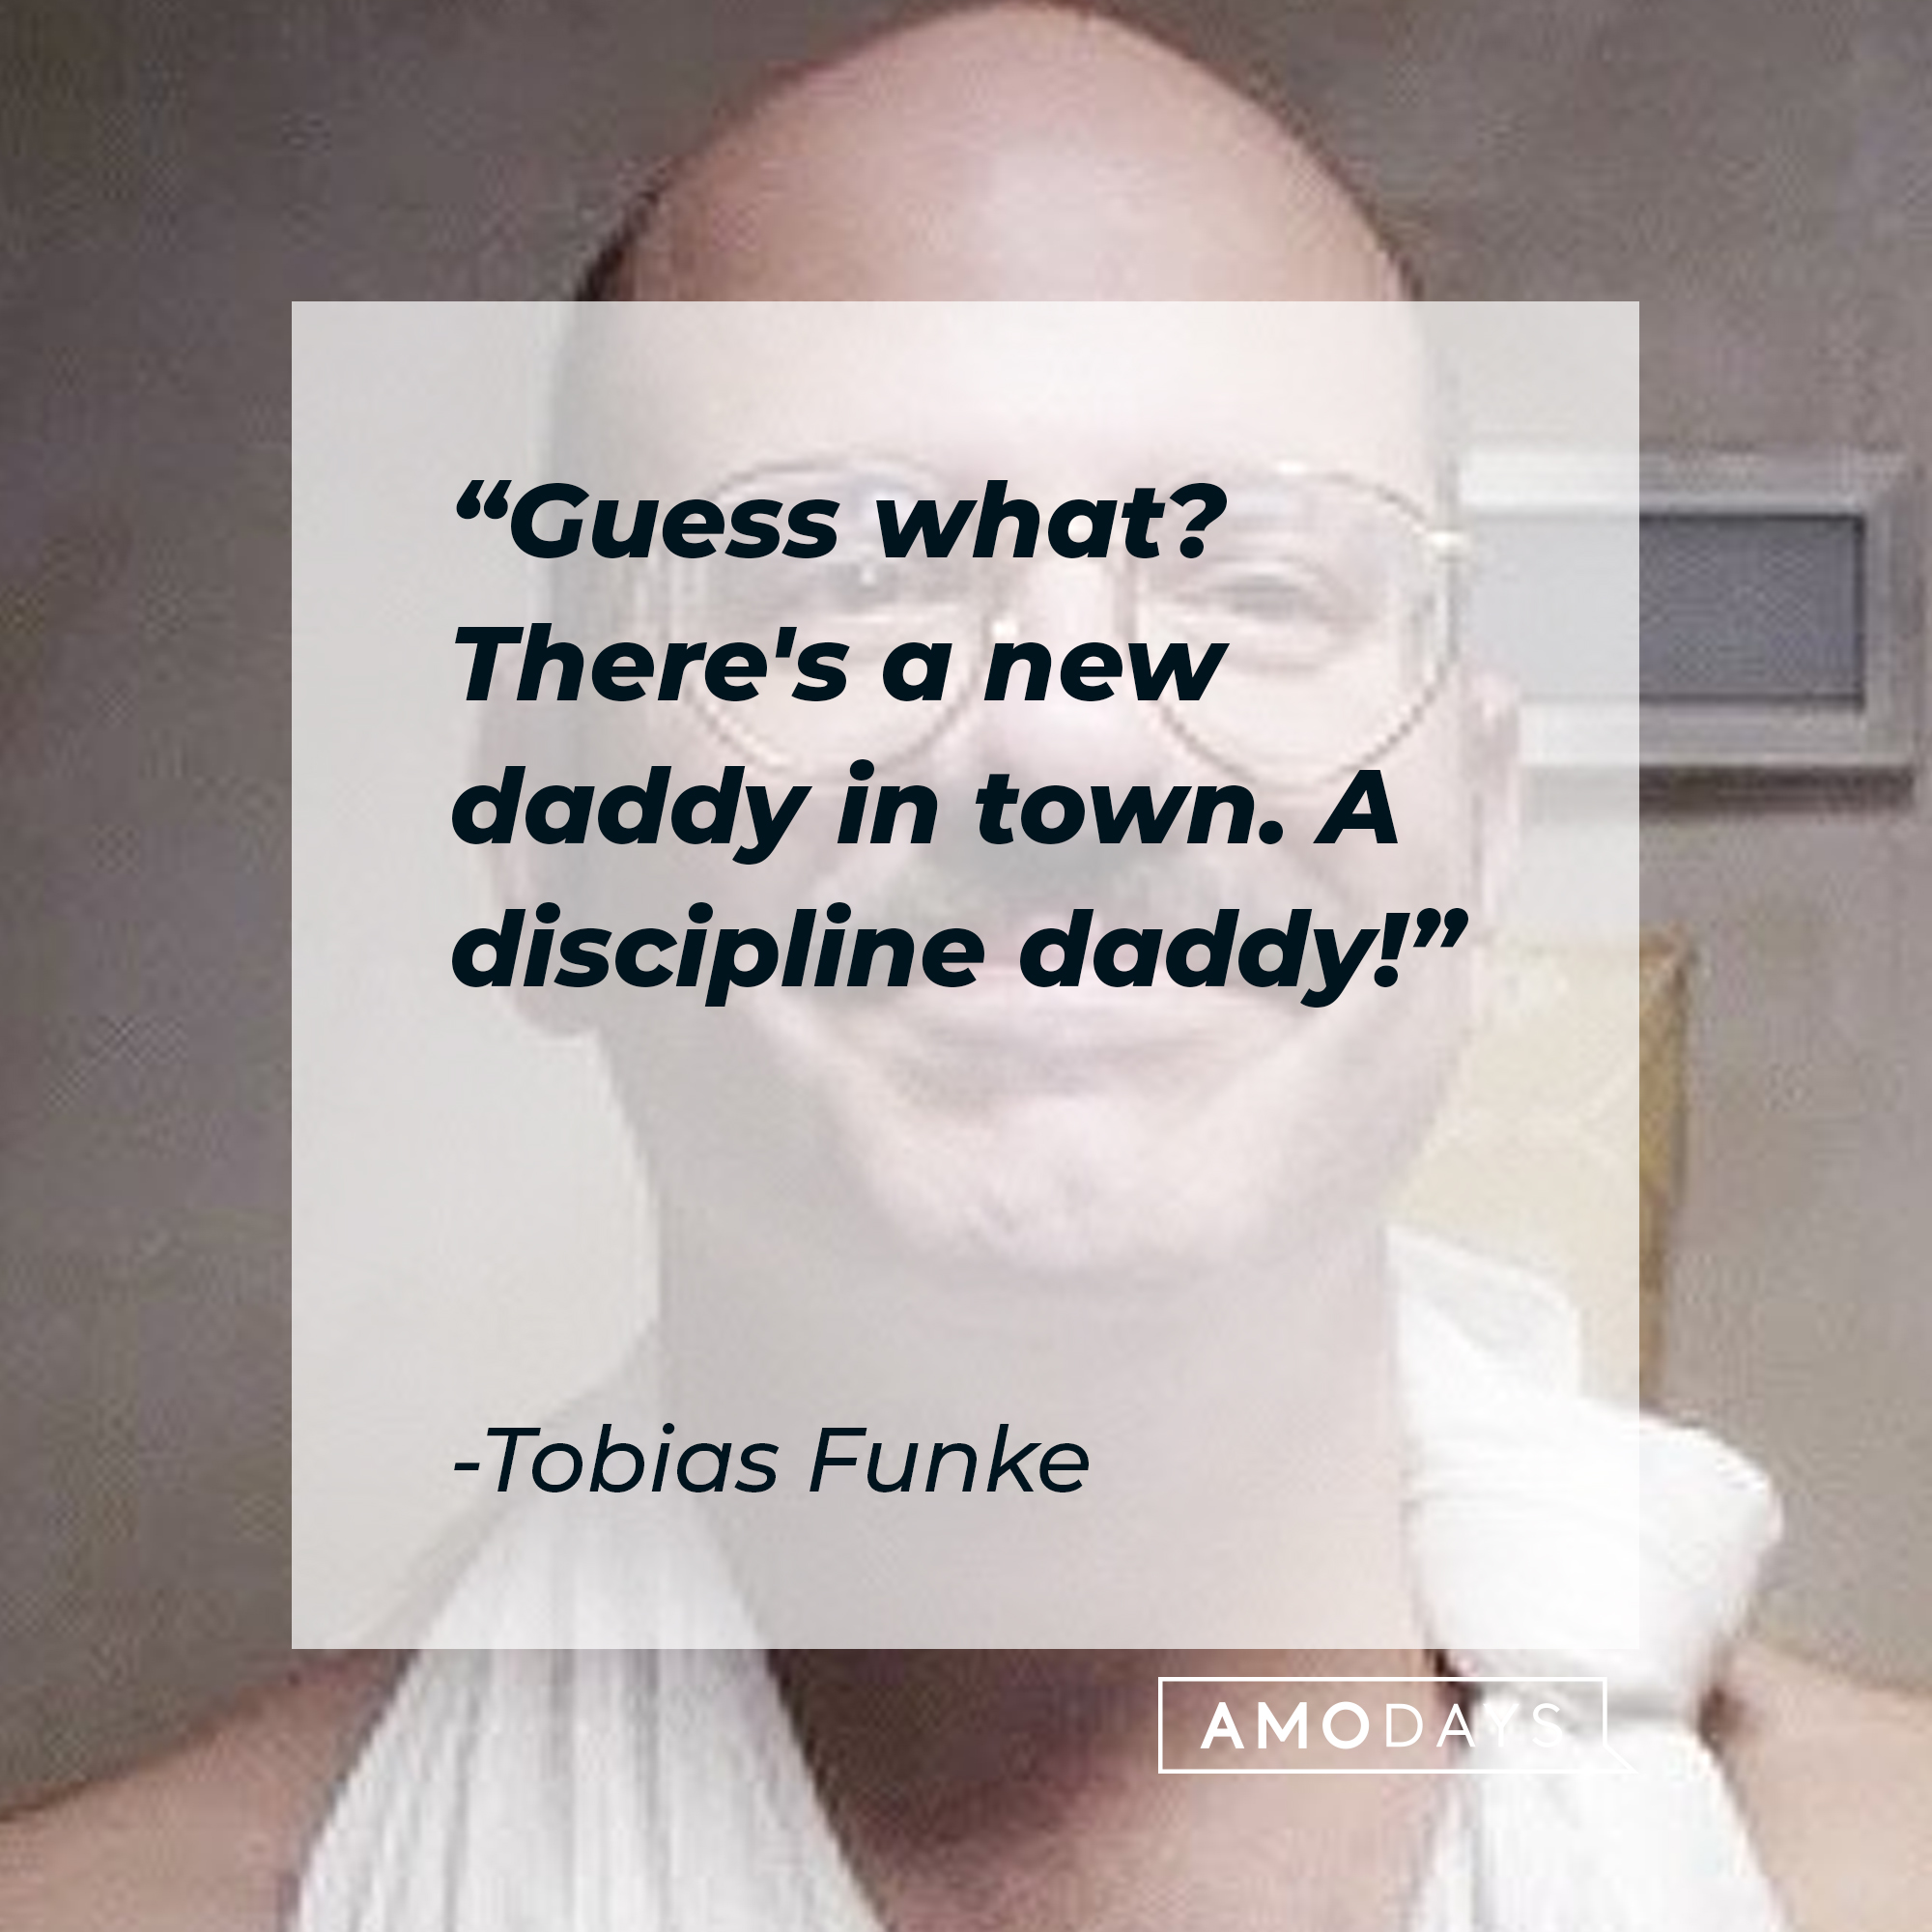 Tobias Funke's quote: "Guess what? There's a new daddy in town. A discipline daddy!" | Source: Facebook.com/ArrestedDevelopment